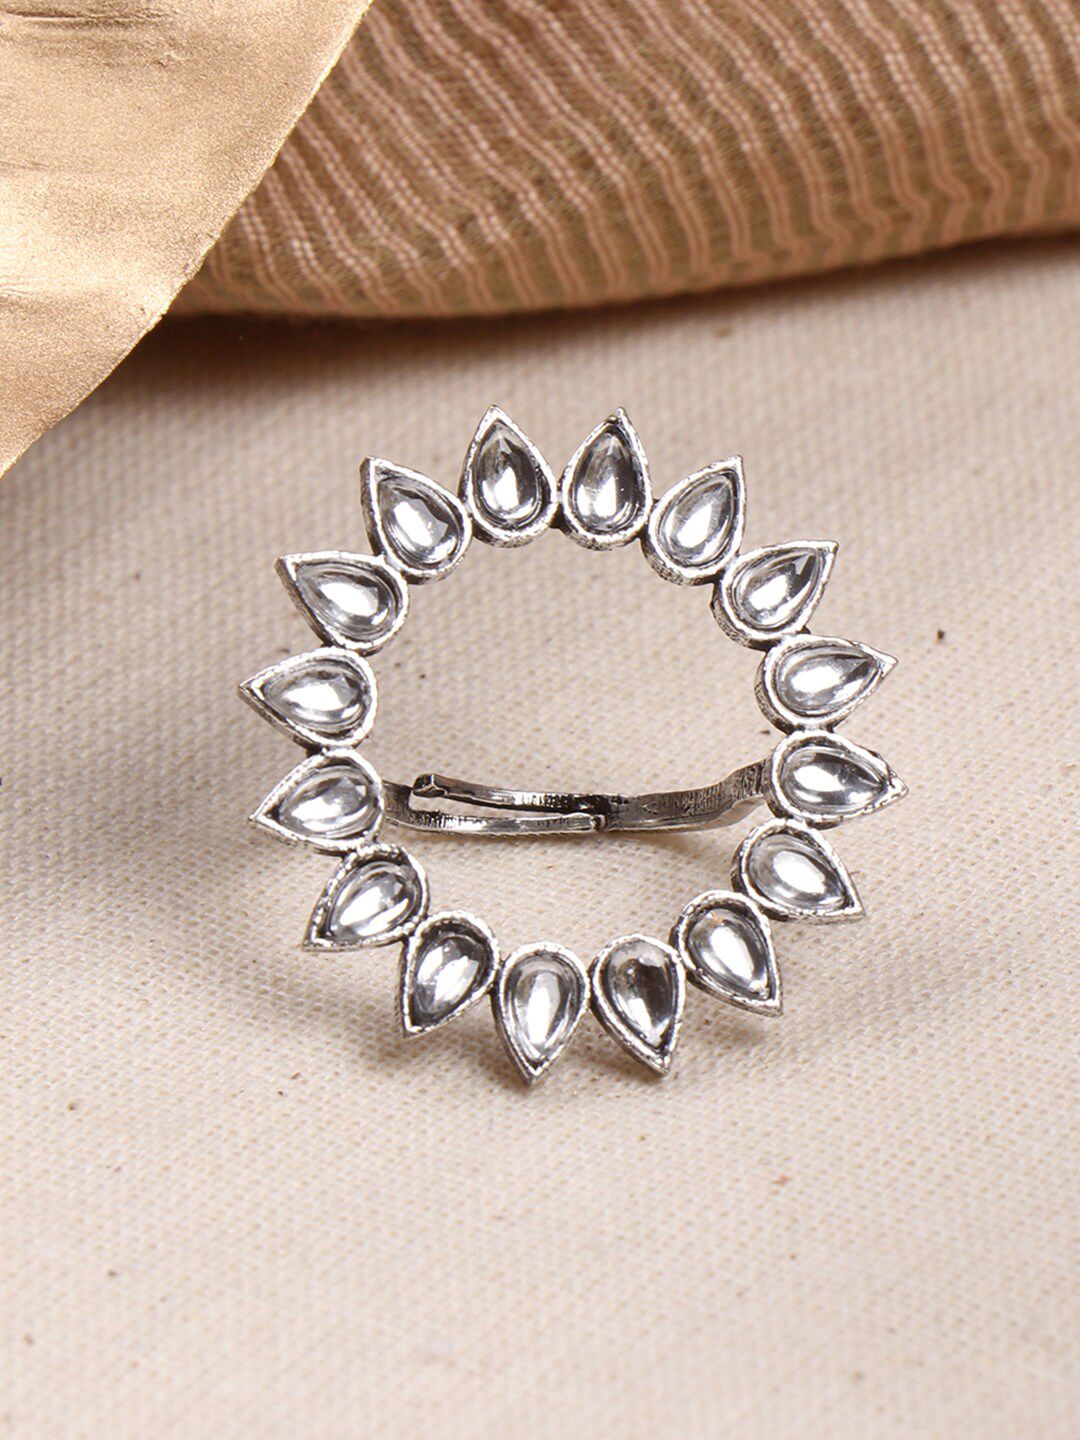 TEEJH Women Oxidised Silver-Toned Sunflower Adjustable Finger Ring Price in India